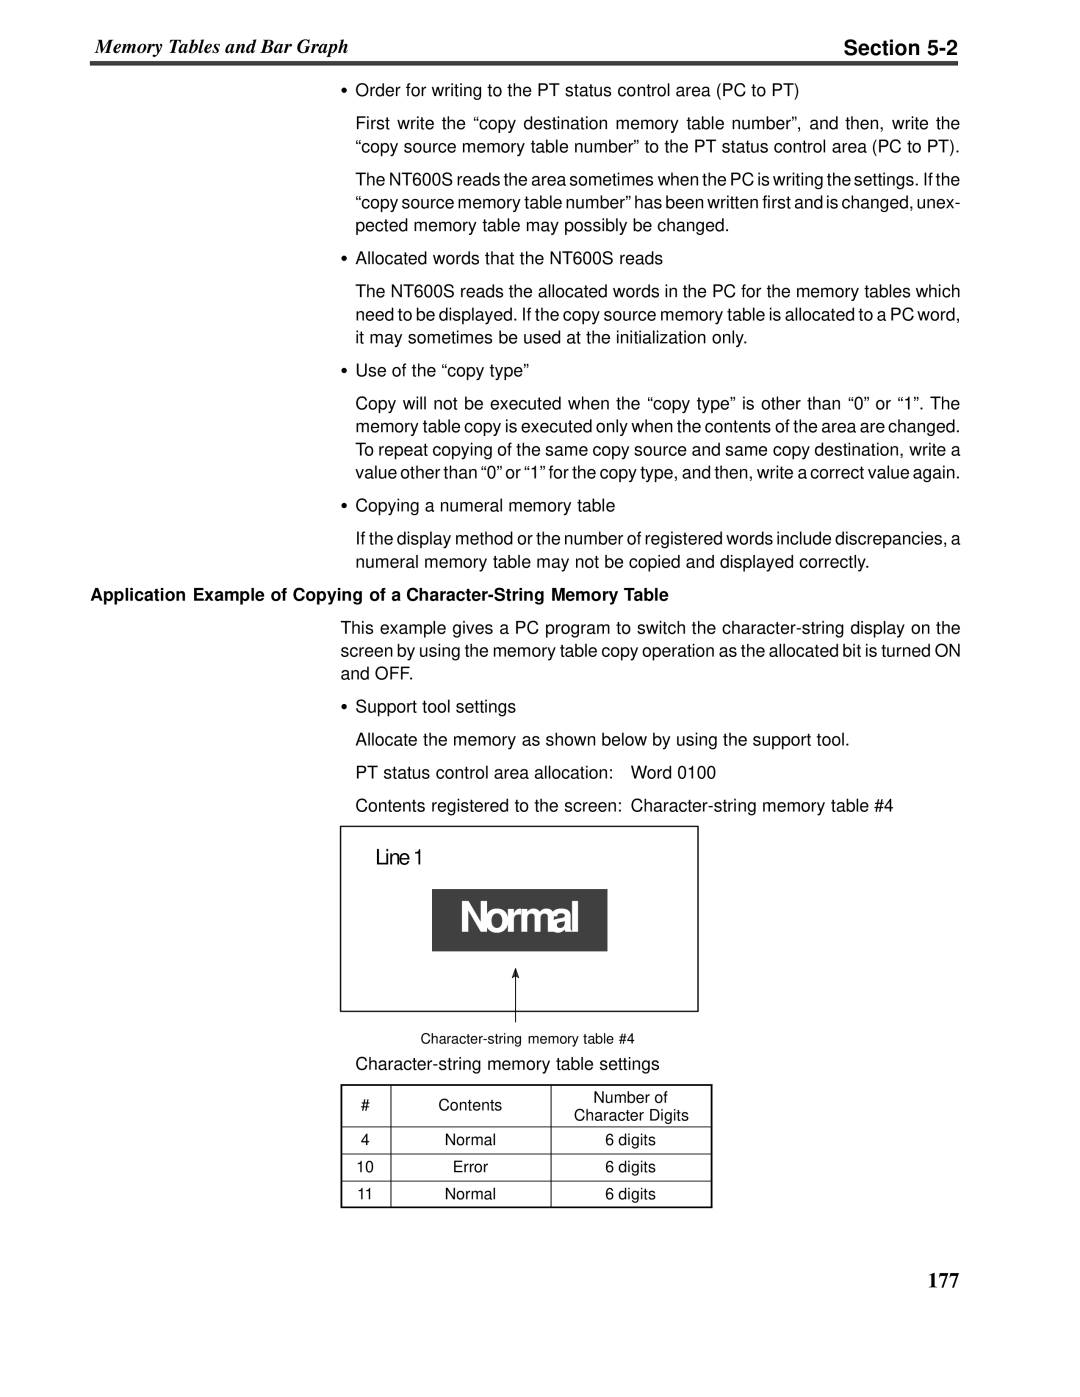 Omron V022-E3-1 operation manual Normal, Section 